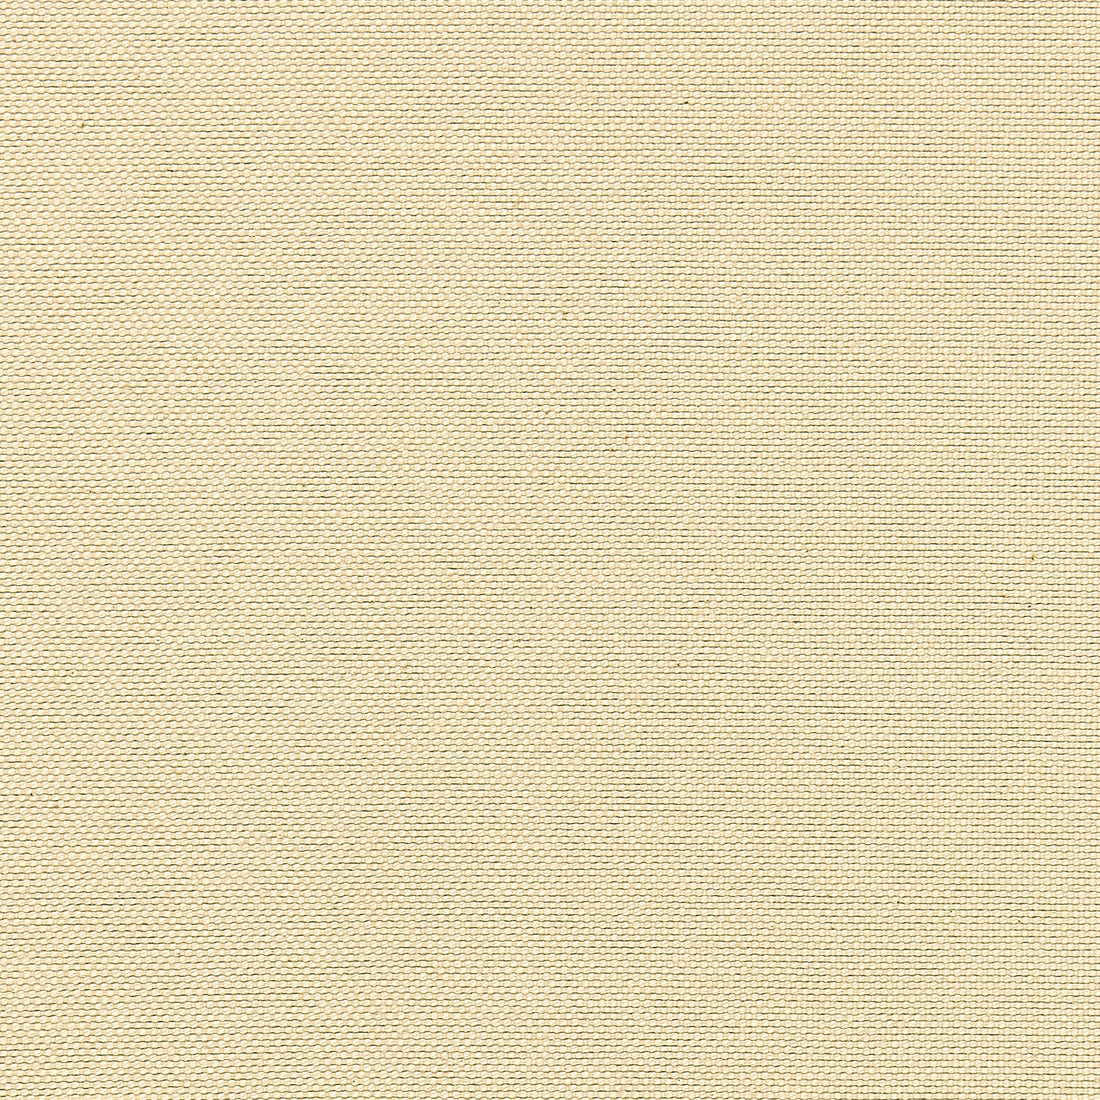 Emery fabric in oatmeal color - pattern number W80264 - by Thibaut in the Kaleidoscope Fabrics collection